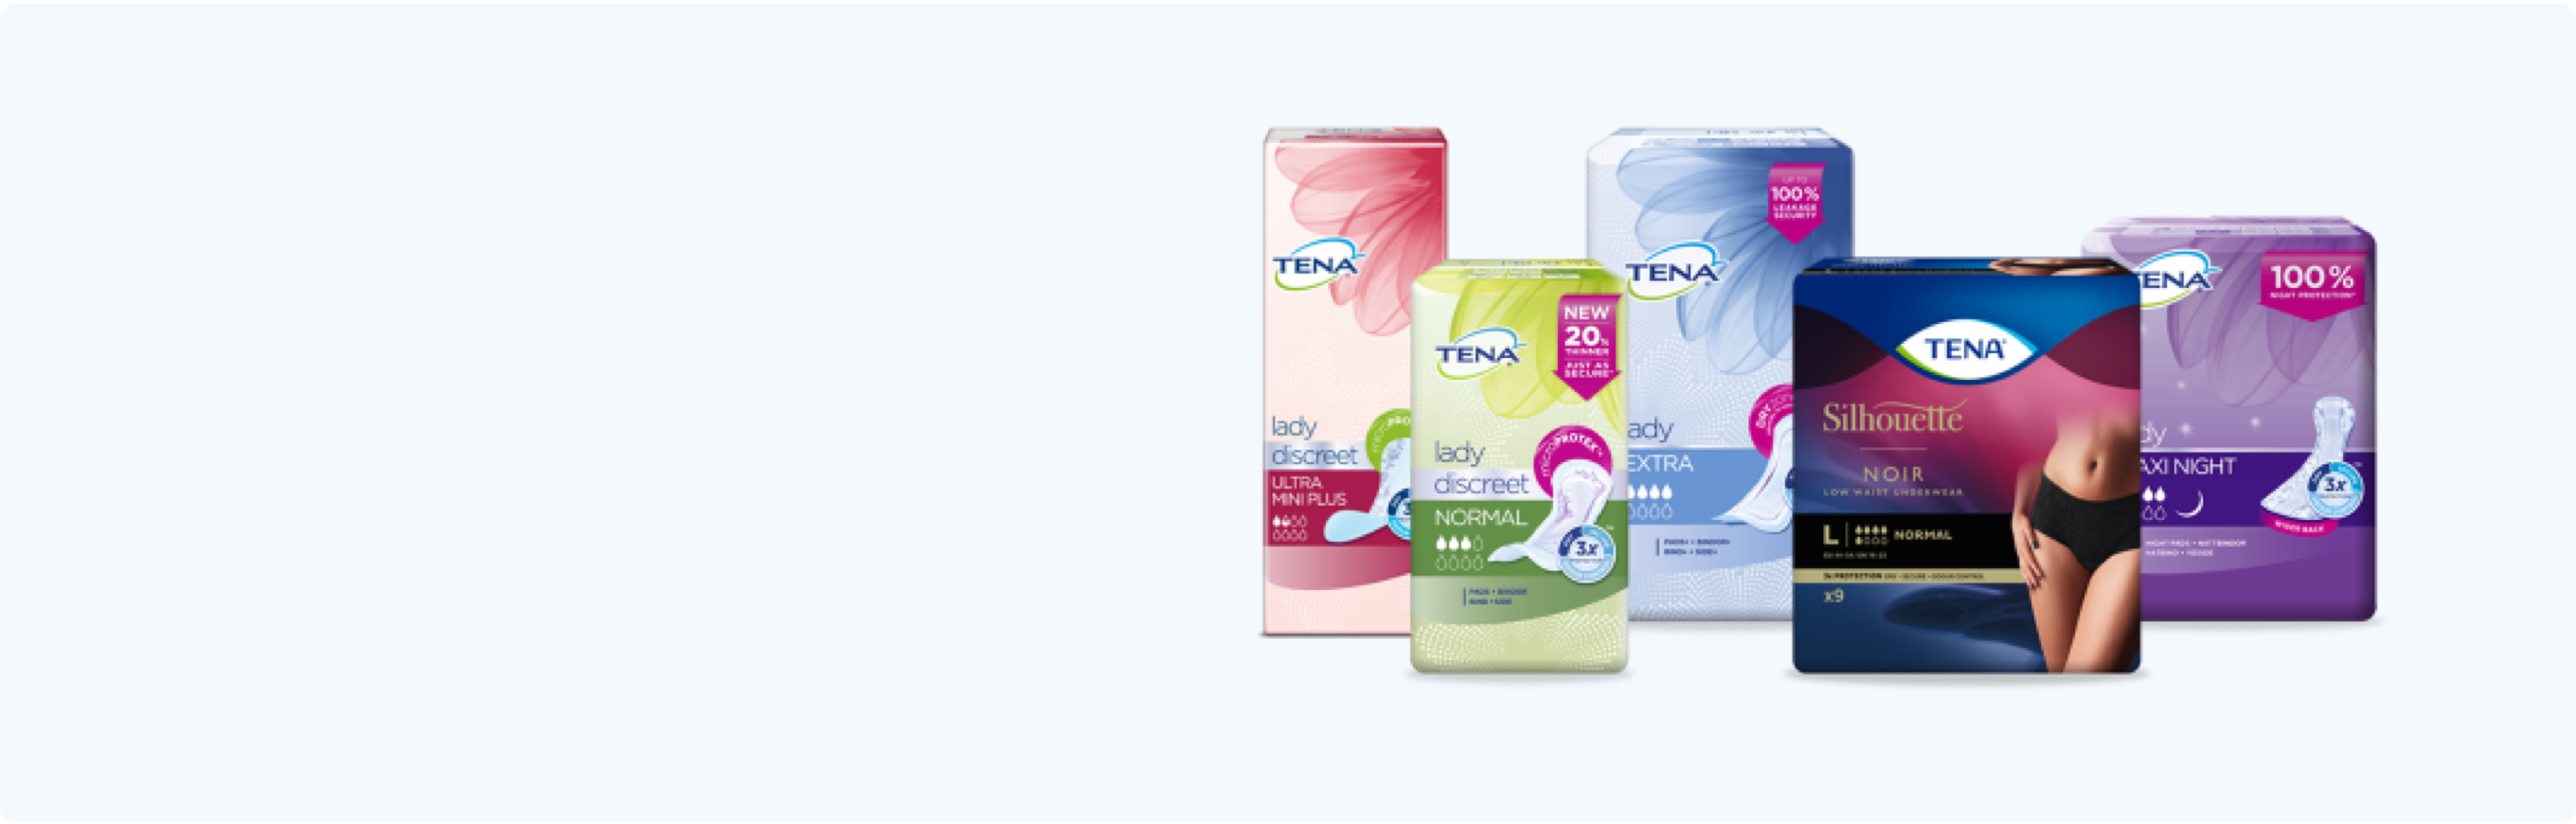 Use our Product Finder and  get 3 TENA samples for FREEBackground Image